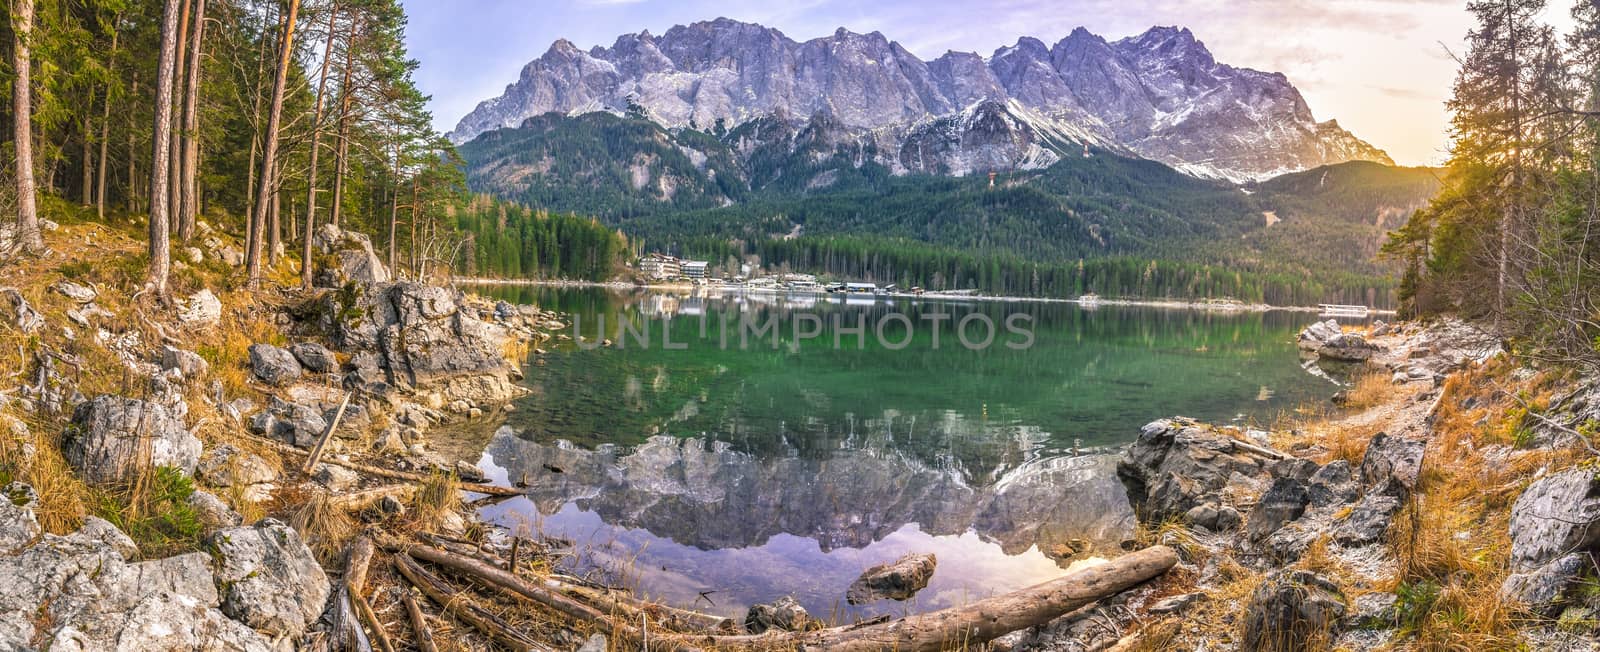 Alpine panorama with the German Alps mountains reflected in the Eibsee lake and green coniferous forest, at sunset in December.